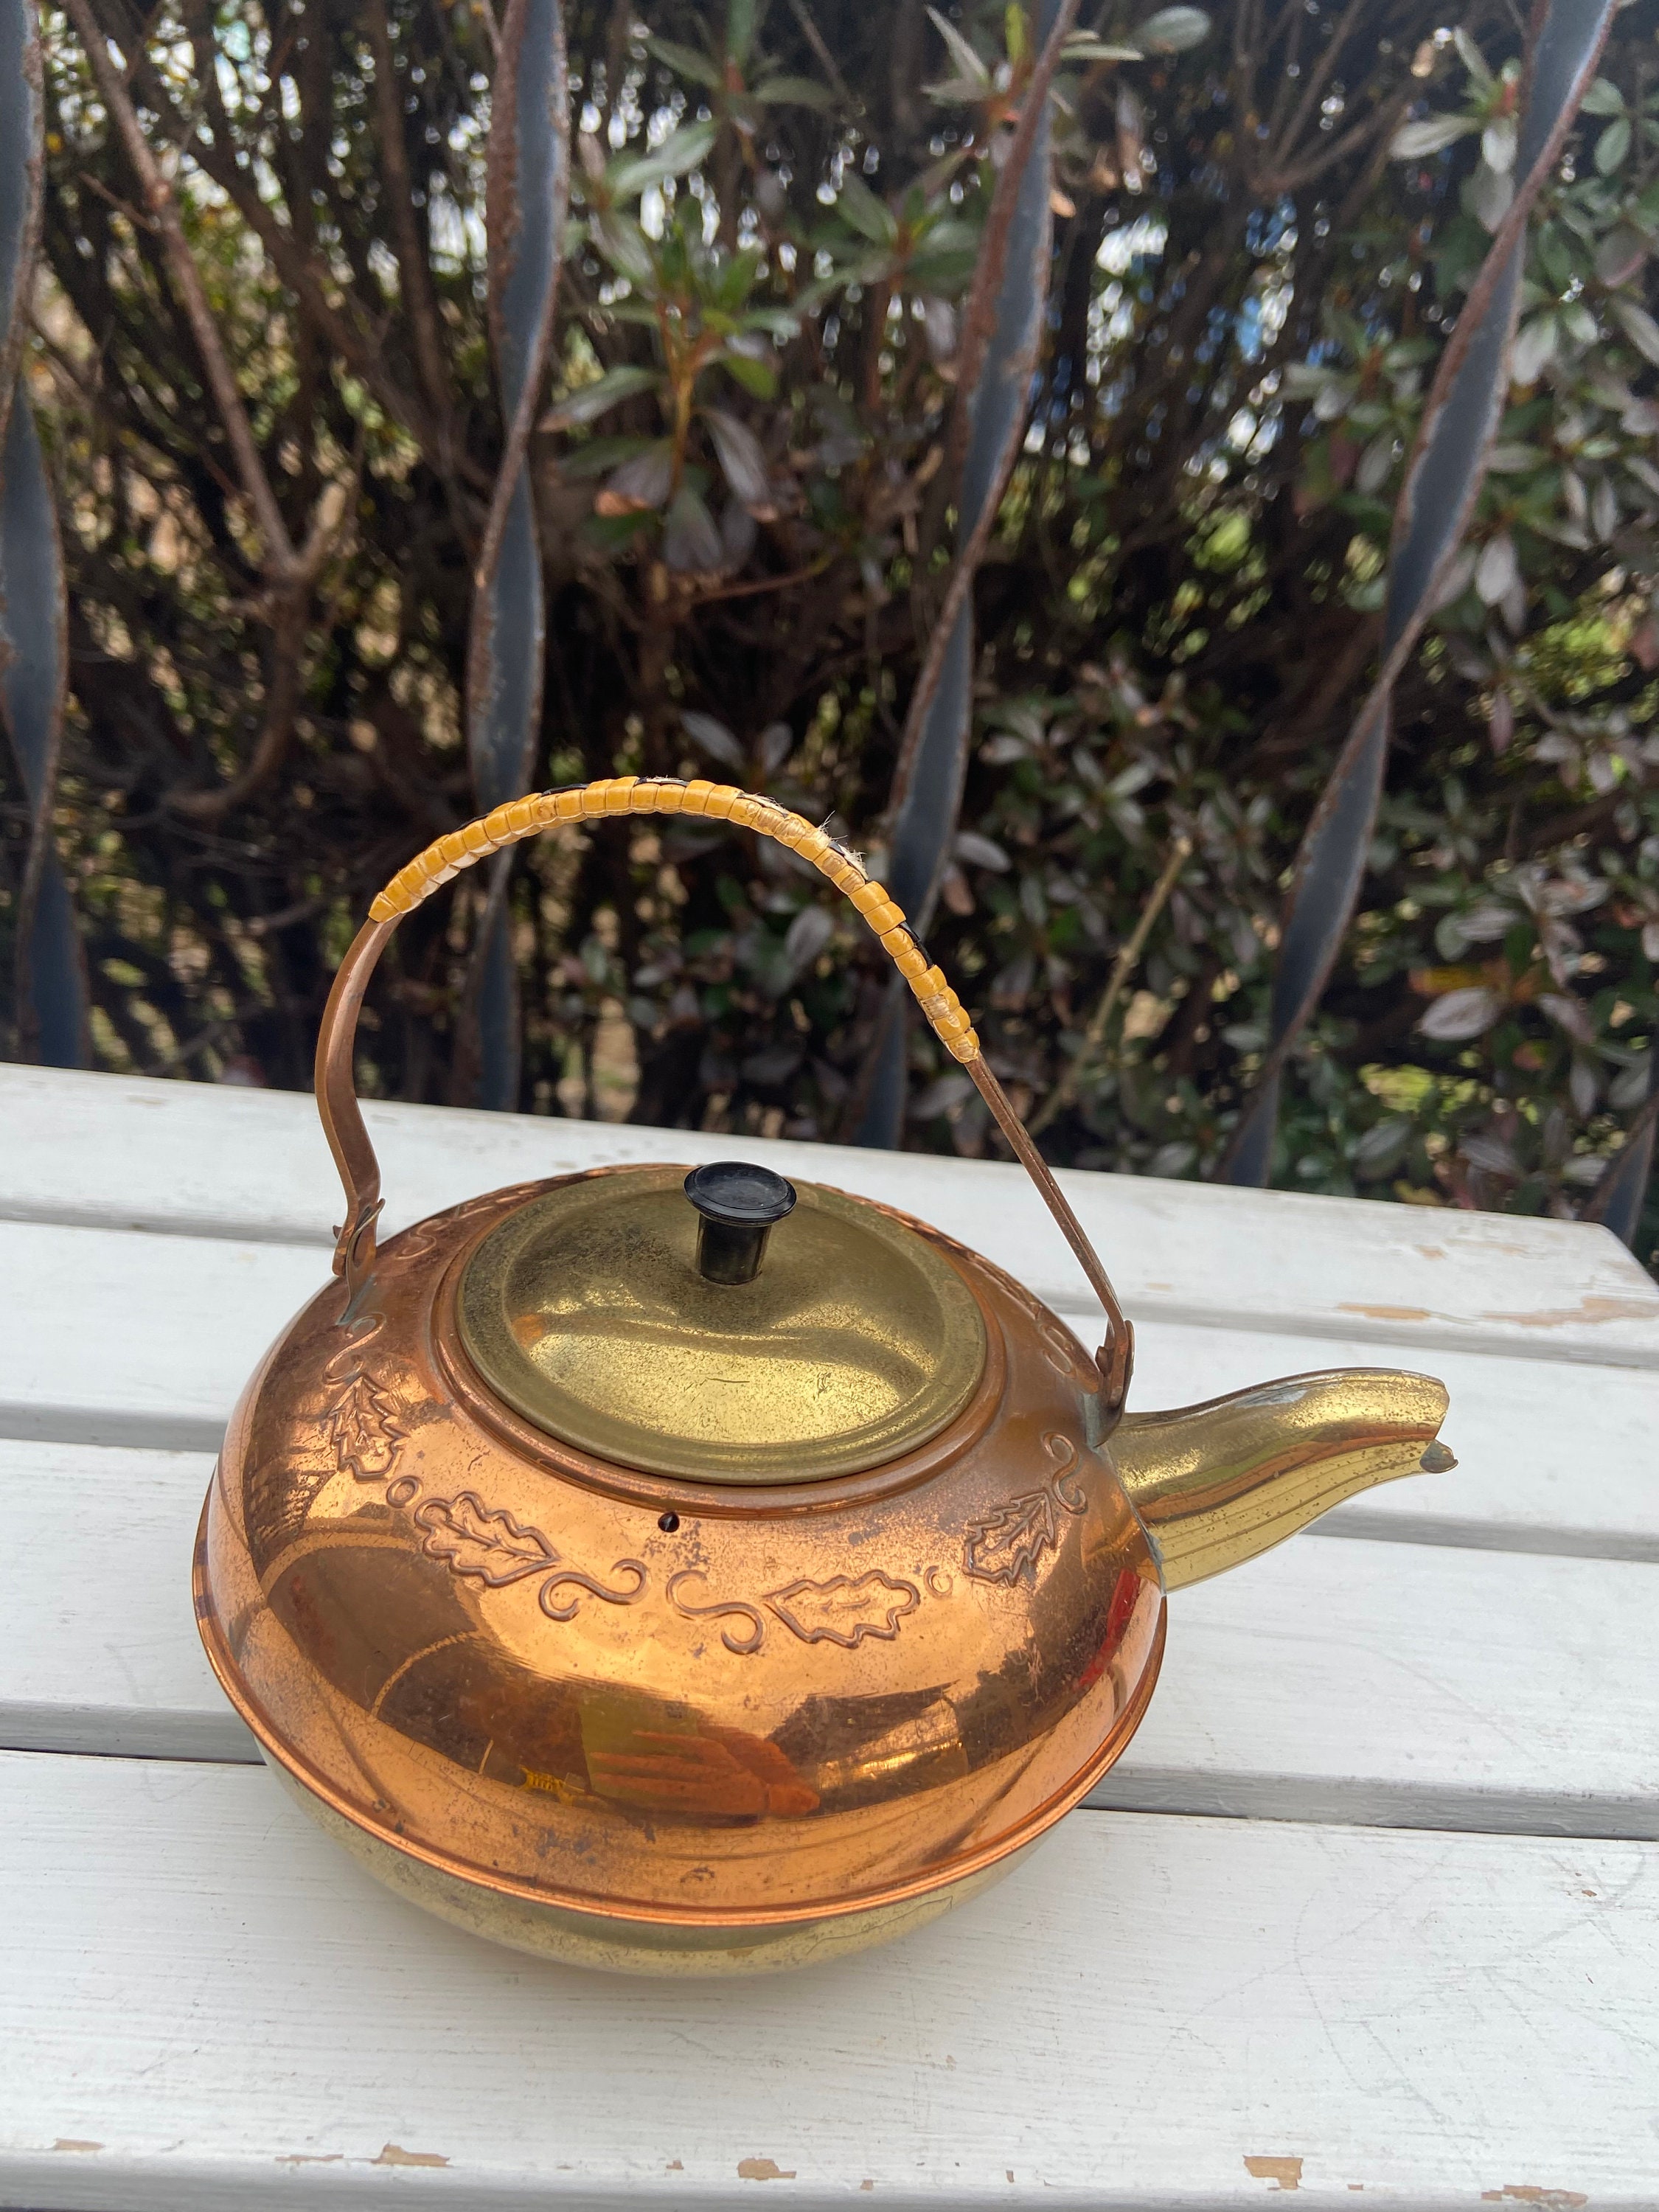 Vintage Small Copper Teapot With Wooden Handle and Knob on Lid. Swing  Handle. Compact Little Tea Kettle. Cute. 